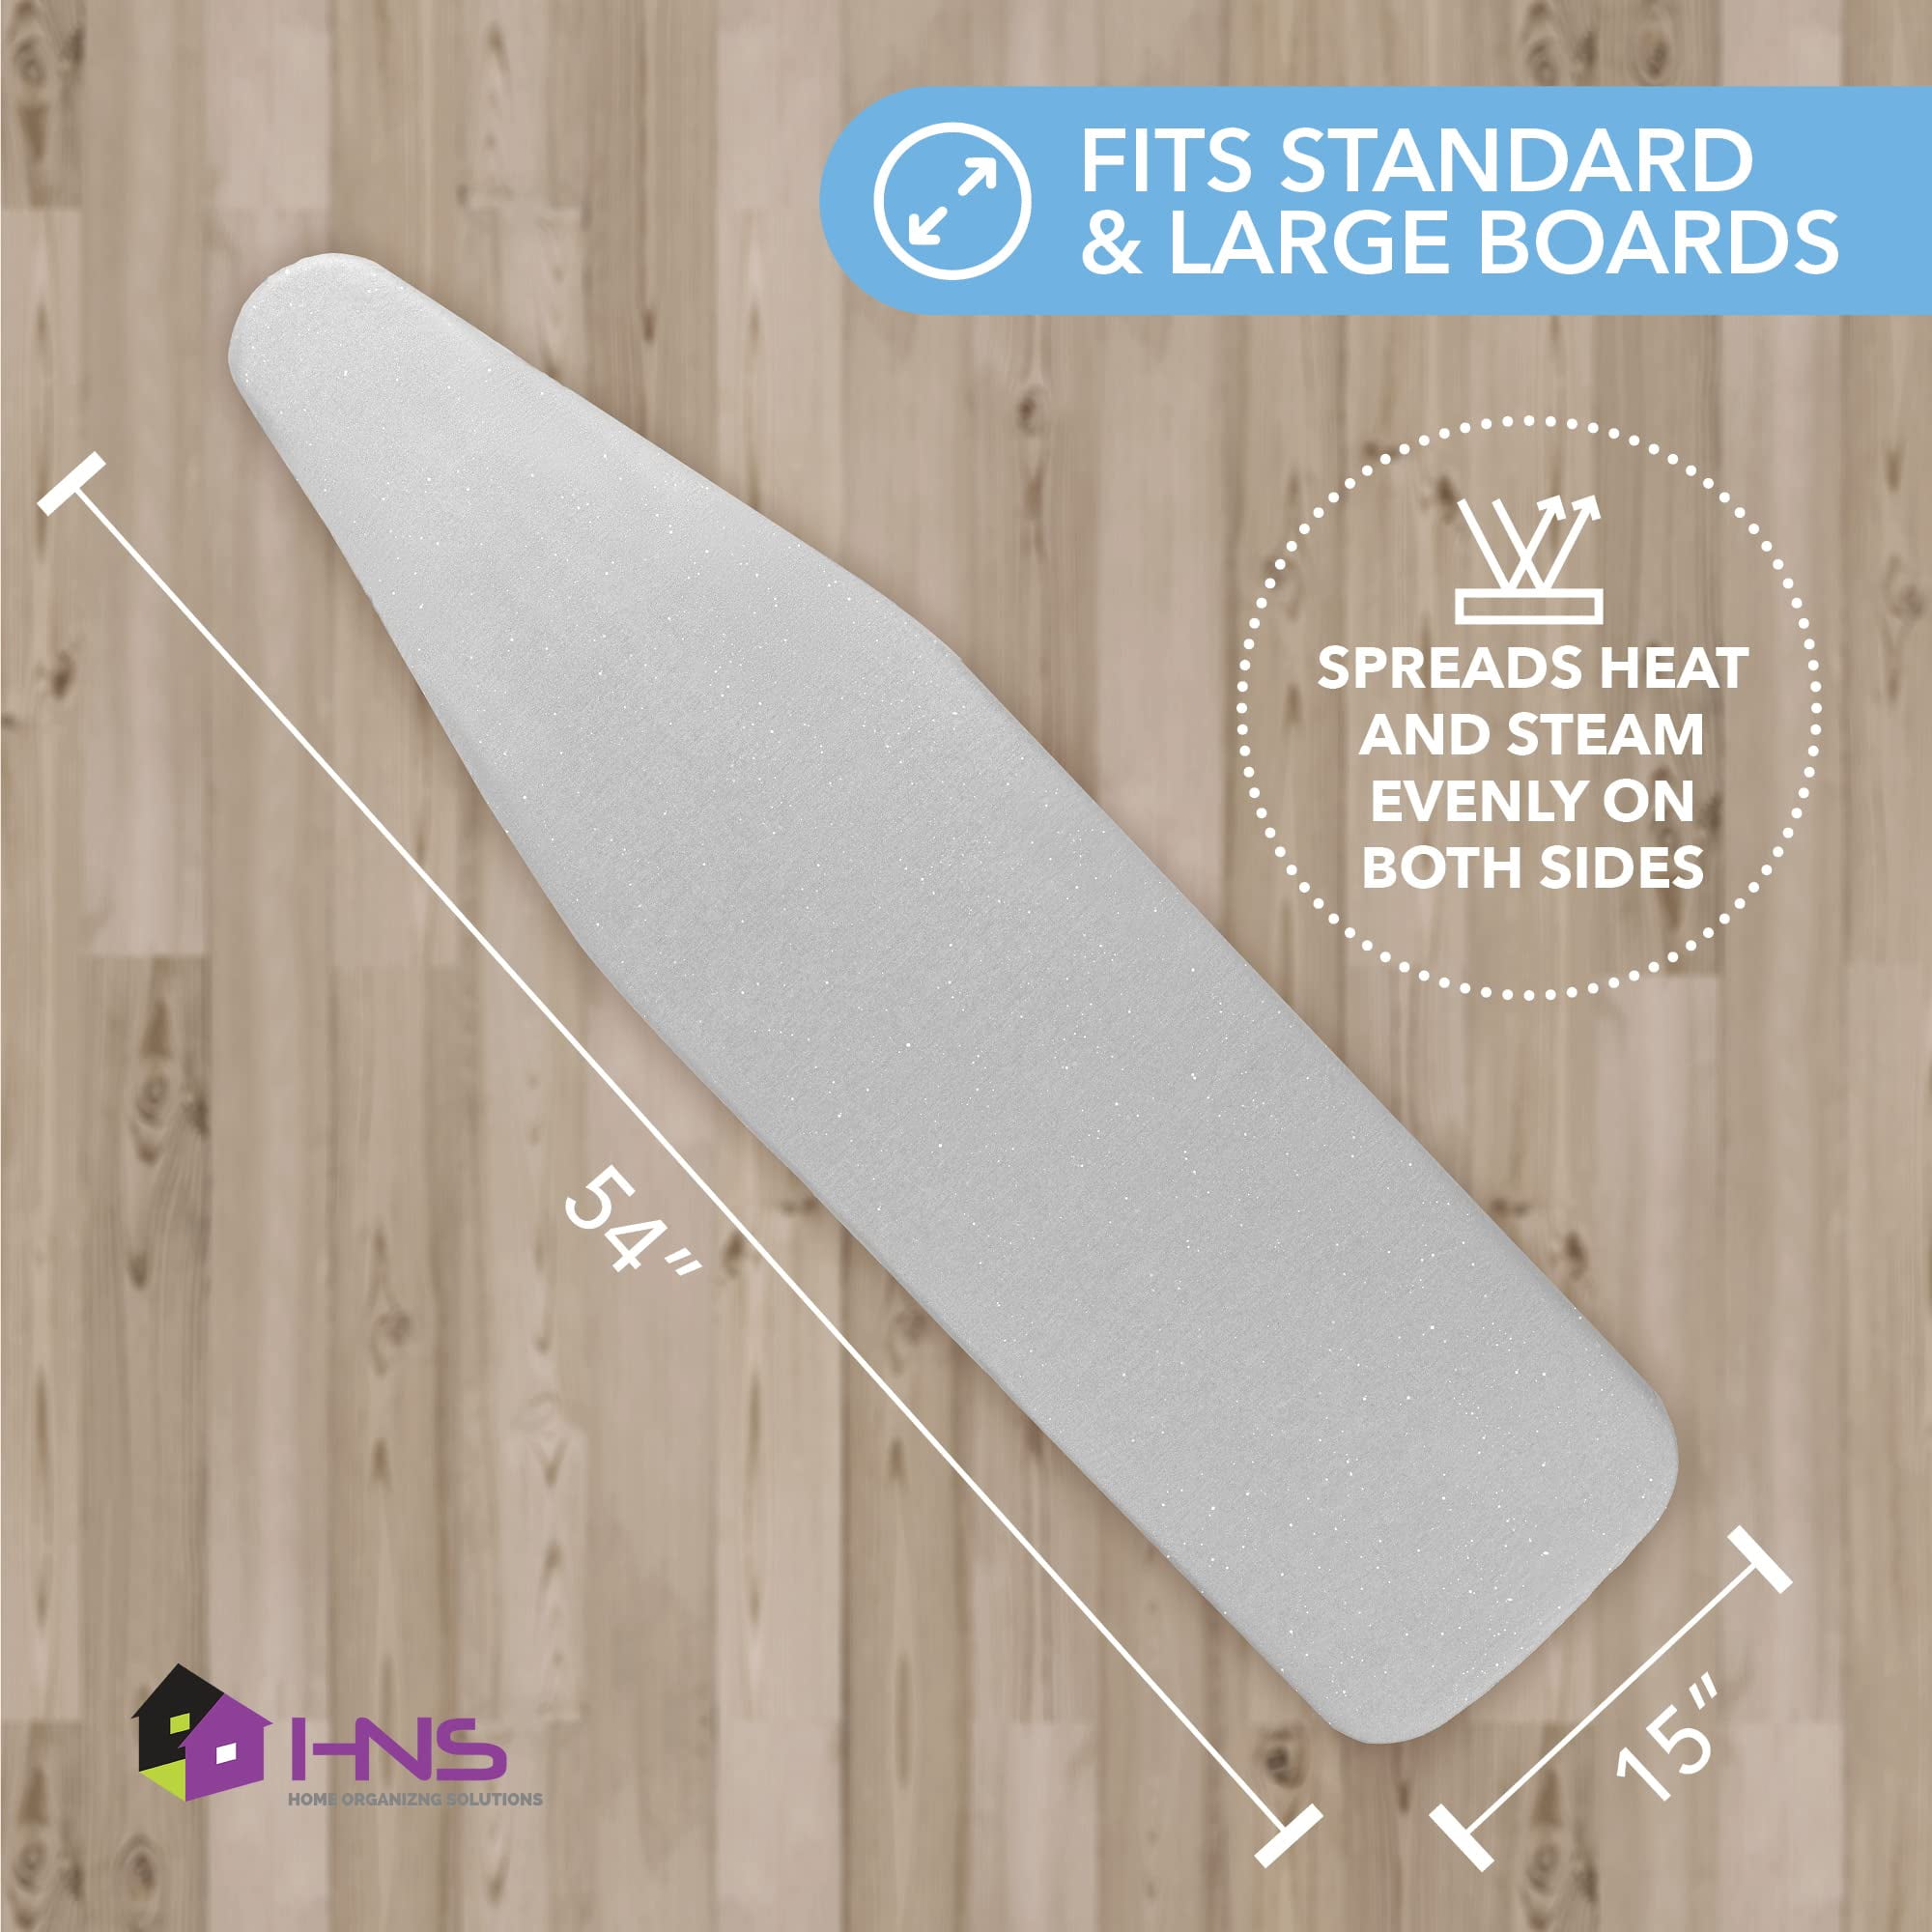  Epica Ironing Board Cover and Pad - Standard Size 15x54 Padded Ironing  Board Covers, Heat Reflective Coating, Scorch & Stain Resistant Iron Board  Cover with Padding Grey & White Lattice 